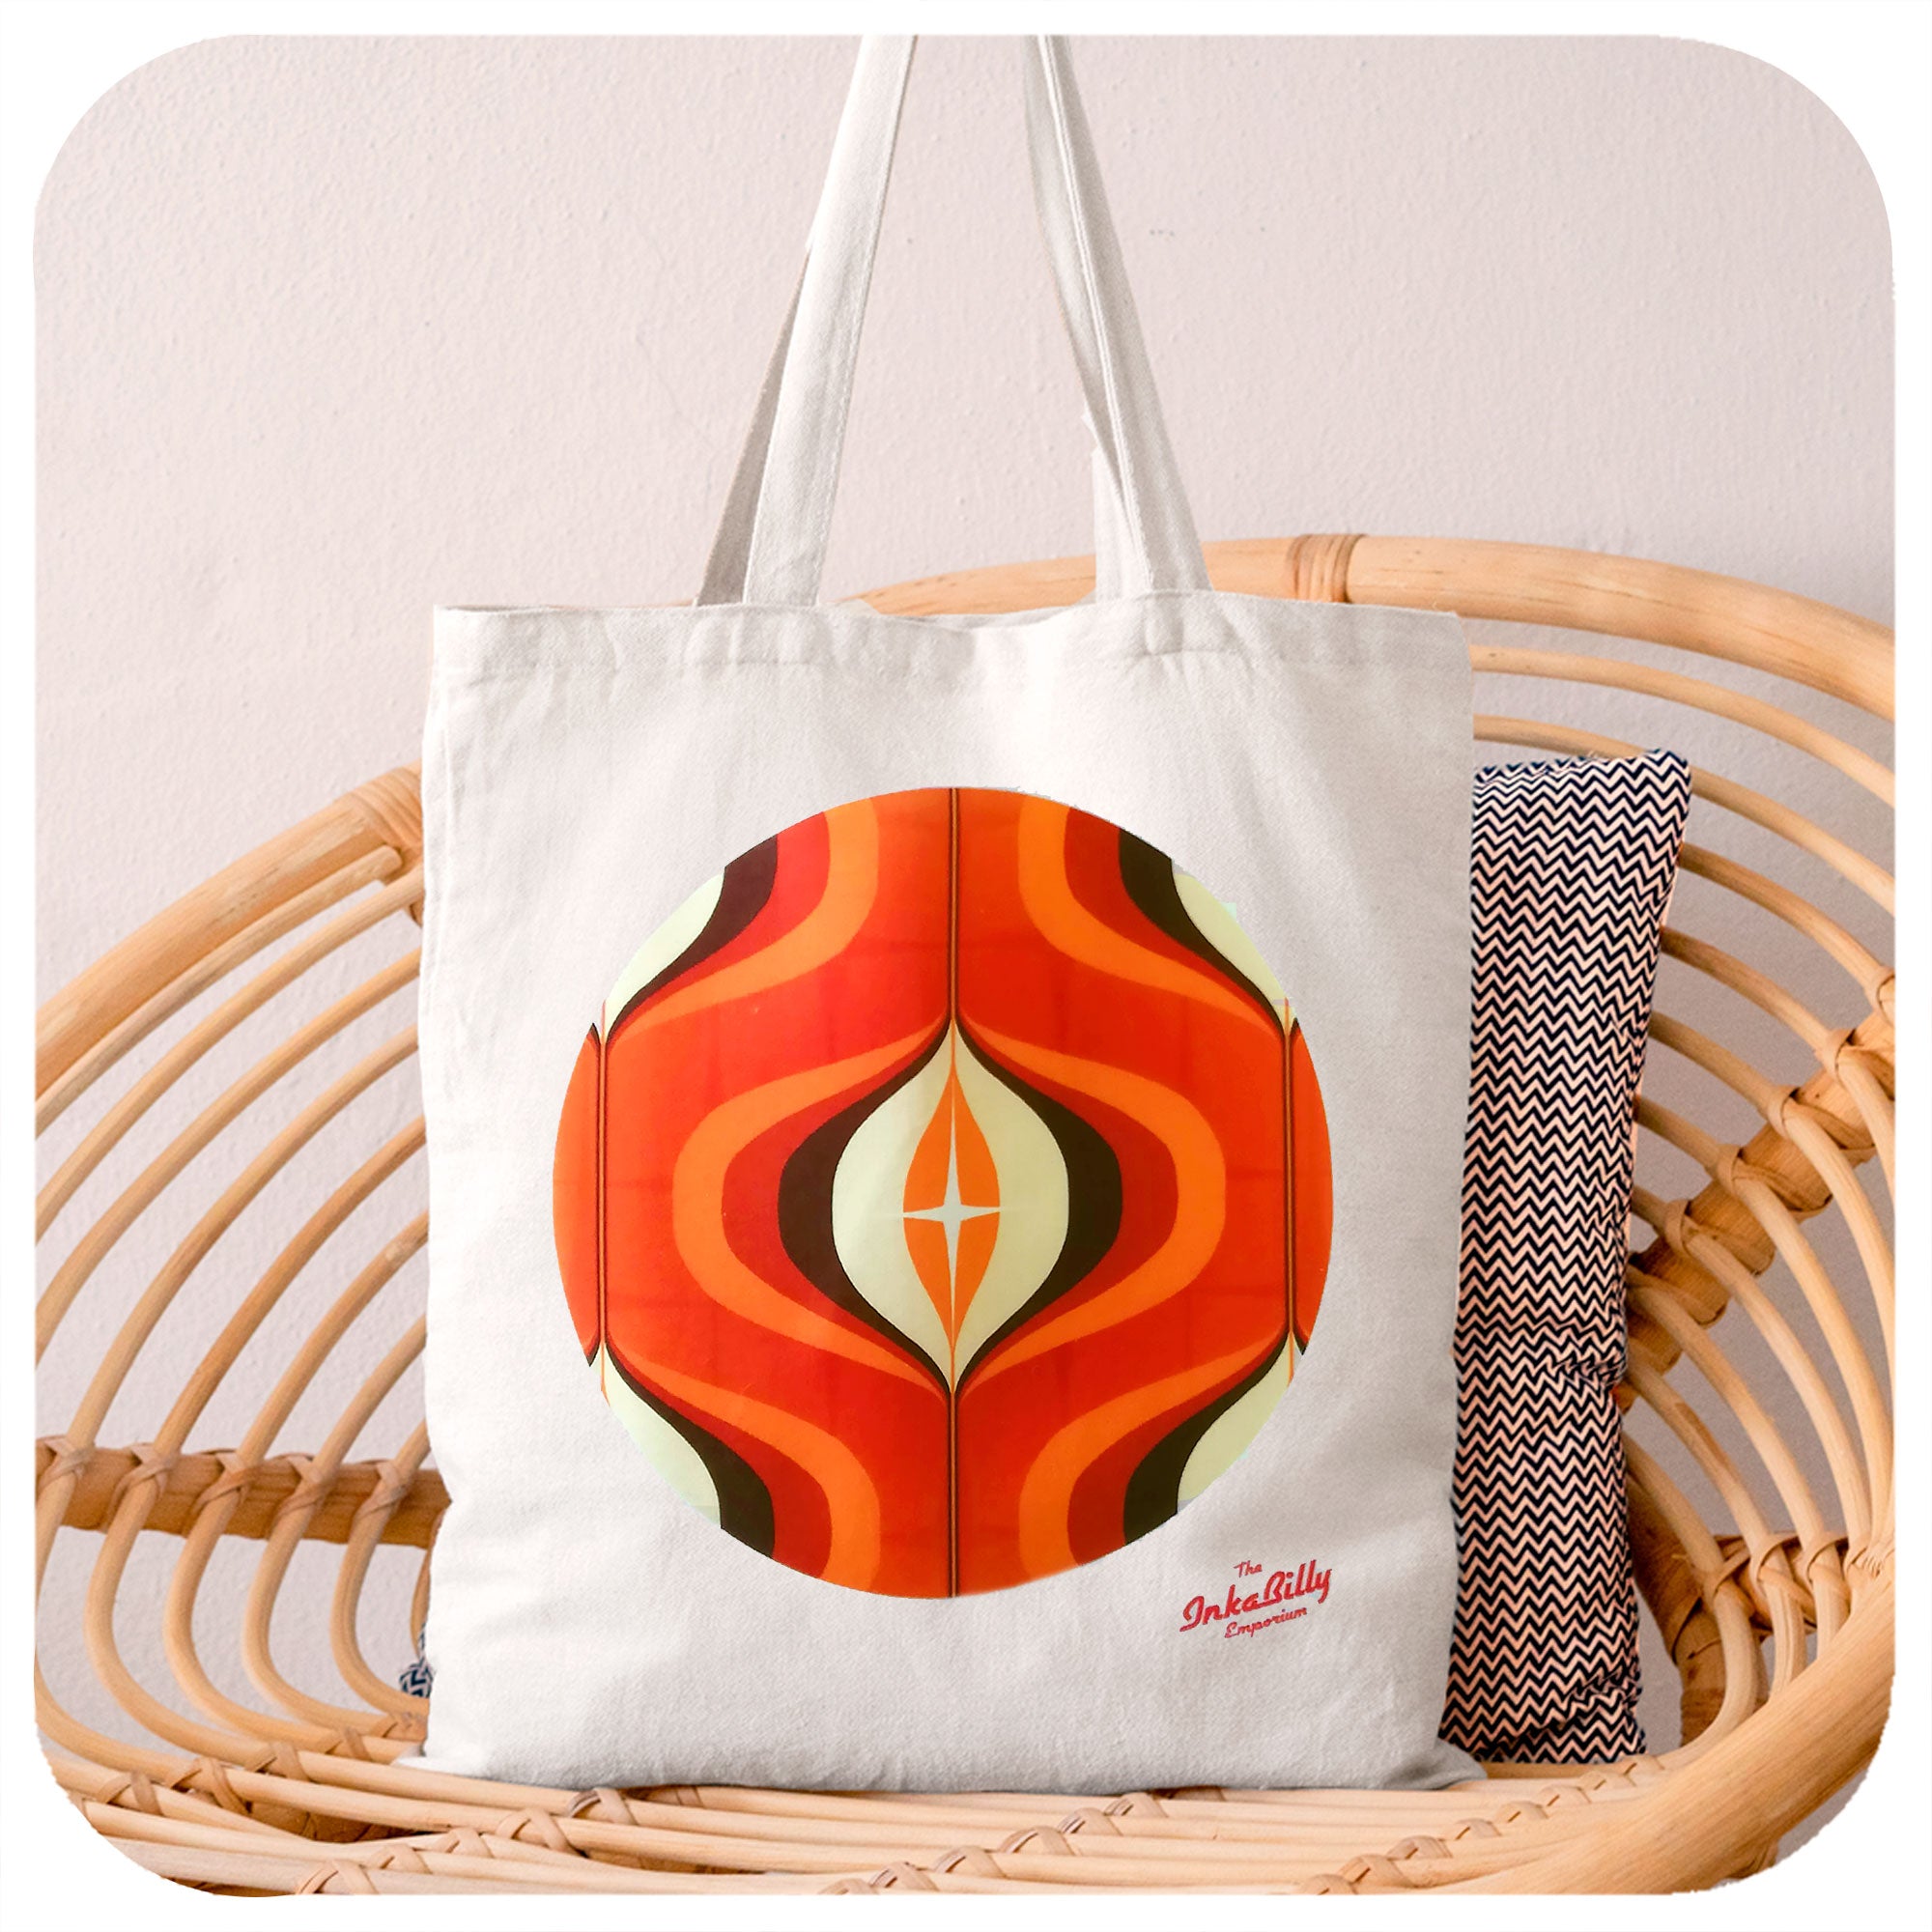 A white tote bag with orange 70s graphic design sits on a rattan chair | The Inkabilly Emporium